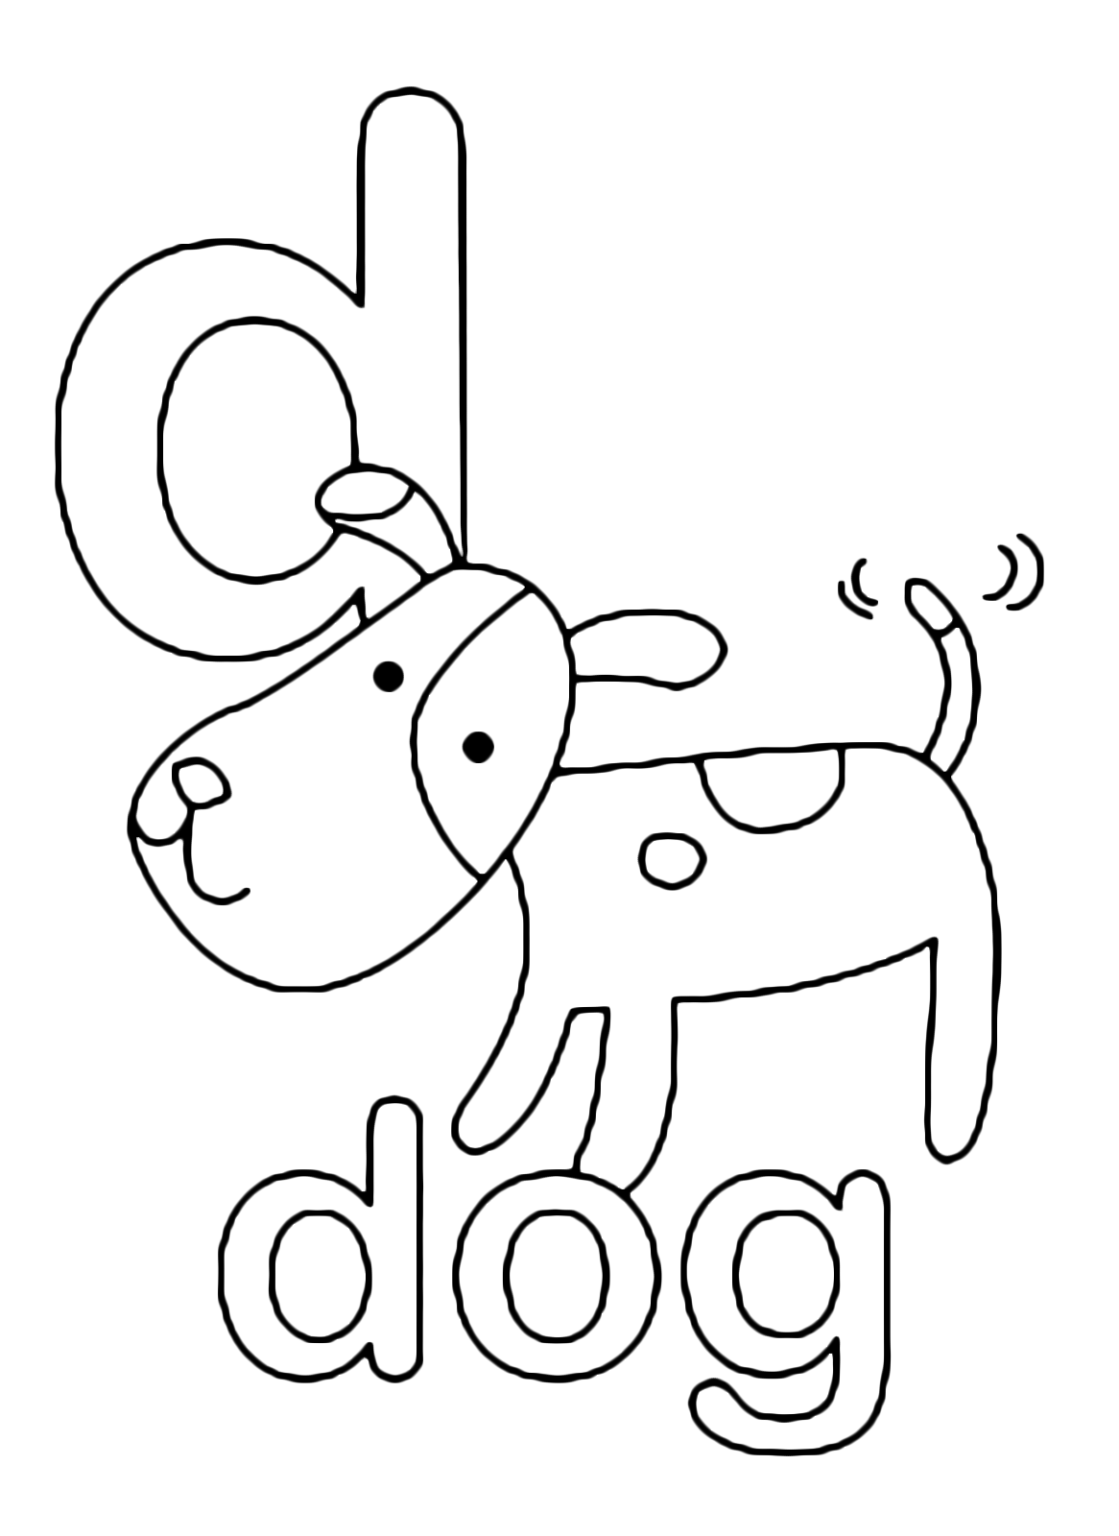 Let's Learn With These Letter D Coloring Pages Pdf - Coloringfolder.com